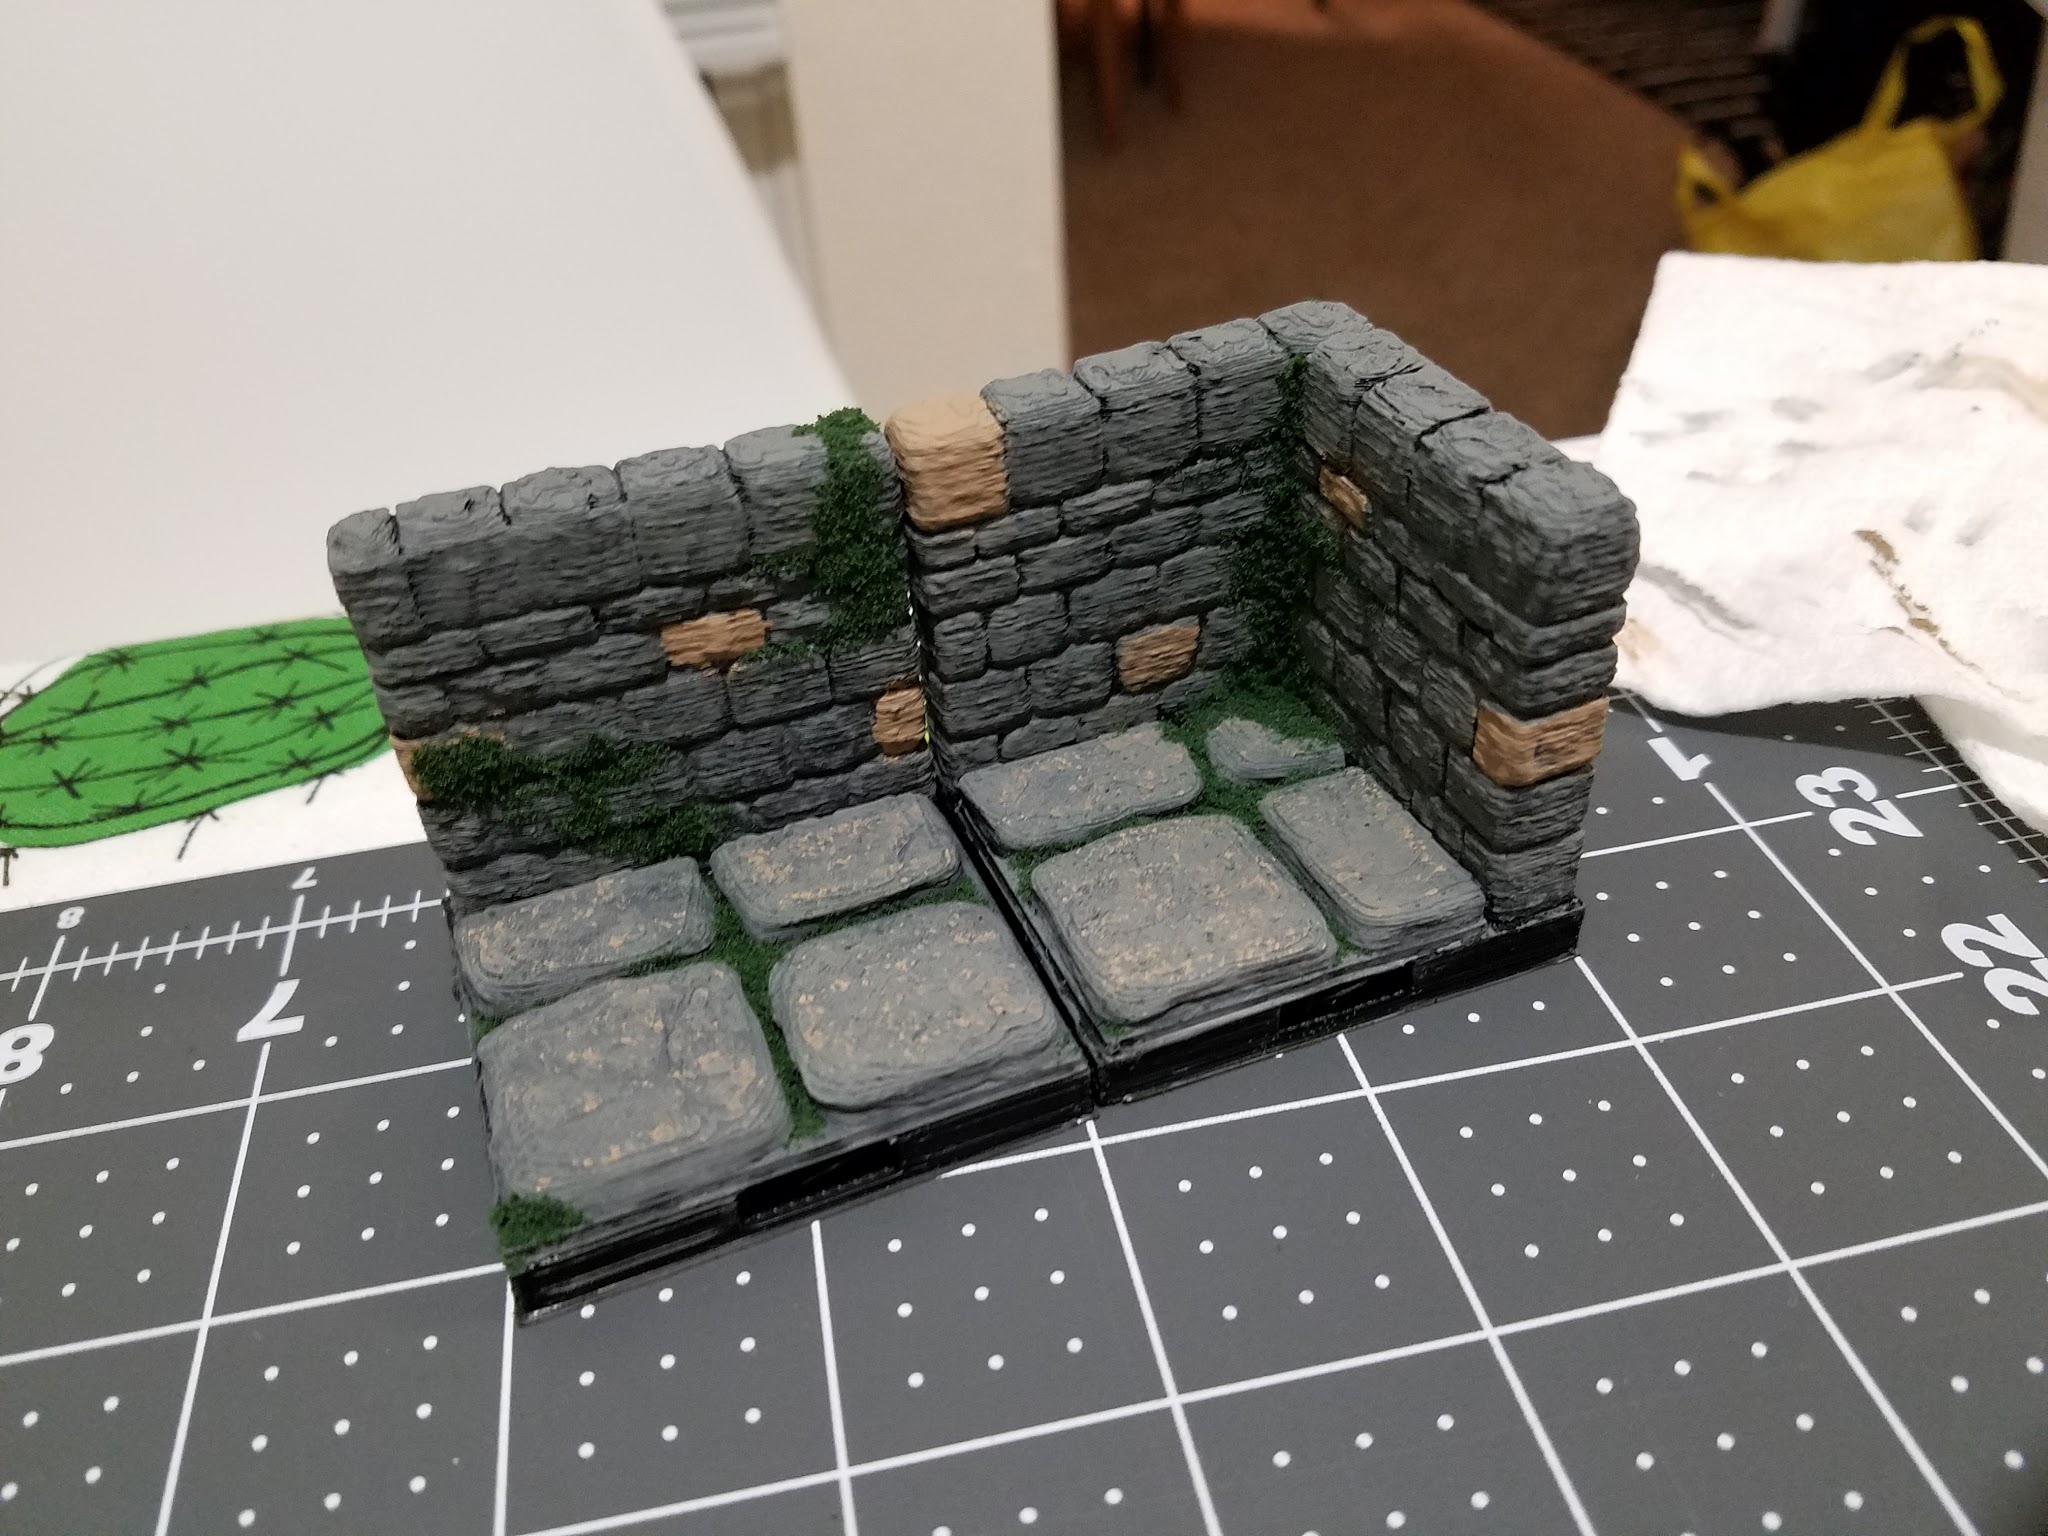 WIP my first time working with XPS foam for terrain making, C&C is